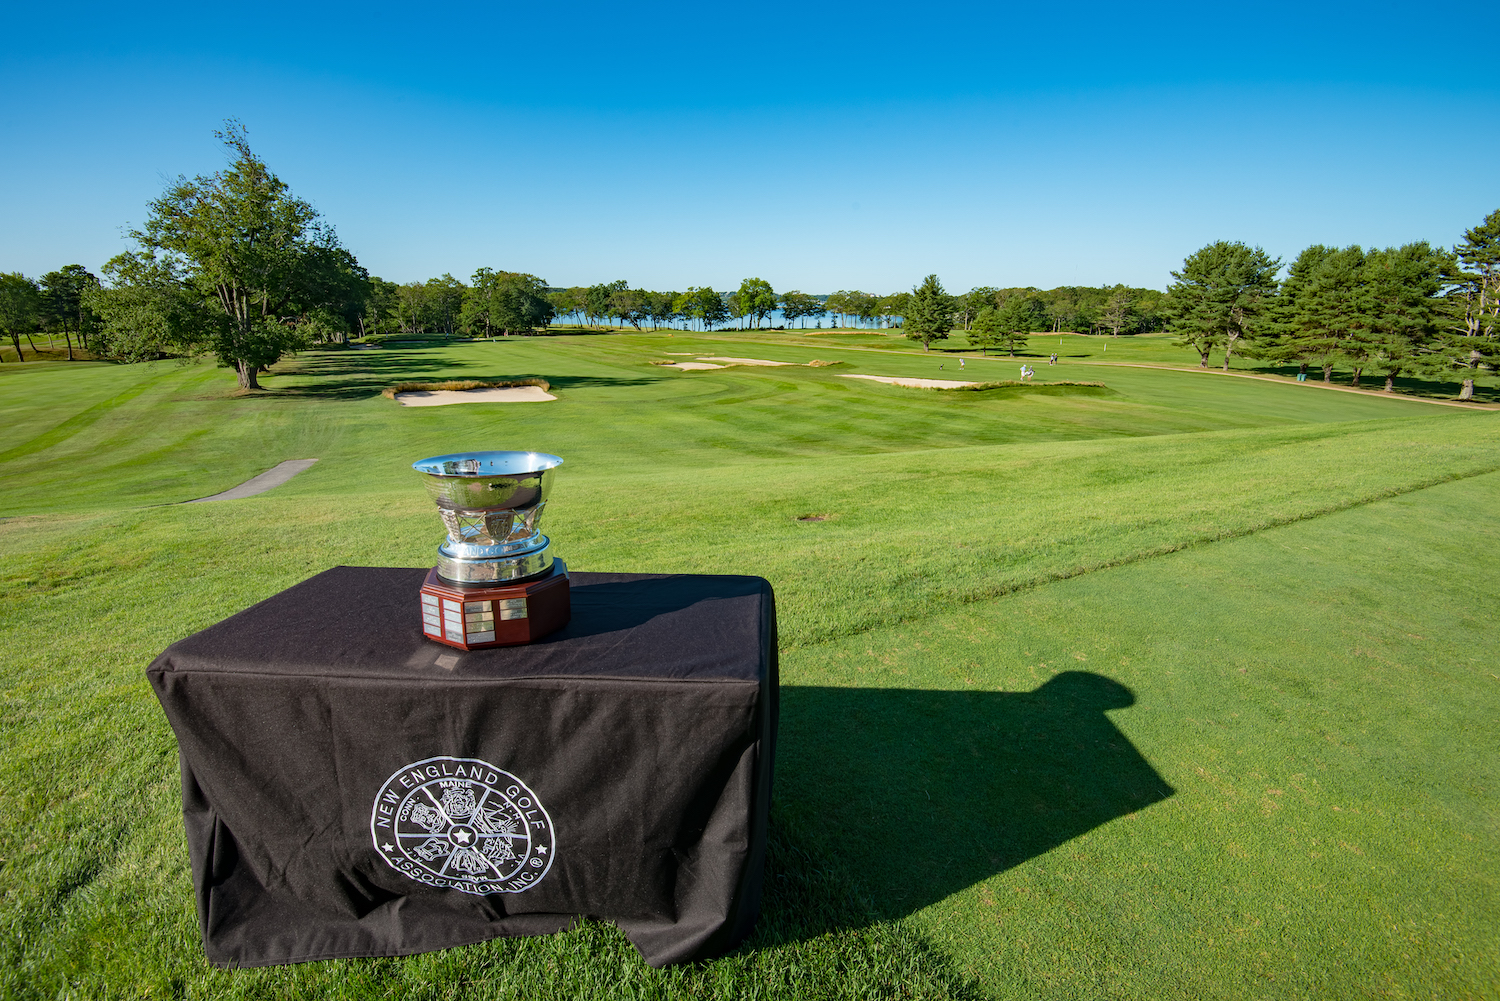 New England Golf Association trophy sitting on a black table in the middle of a golf course.